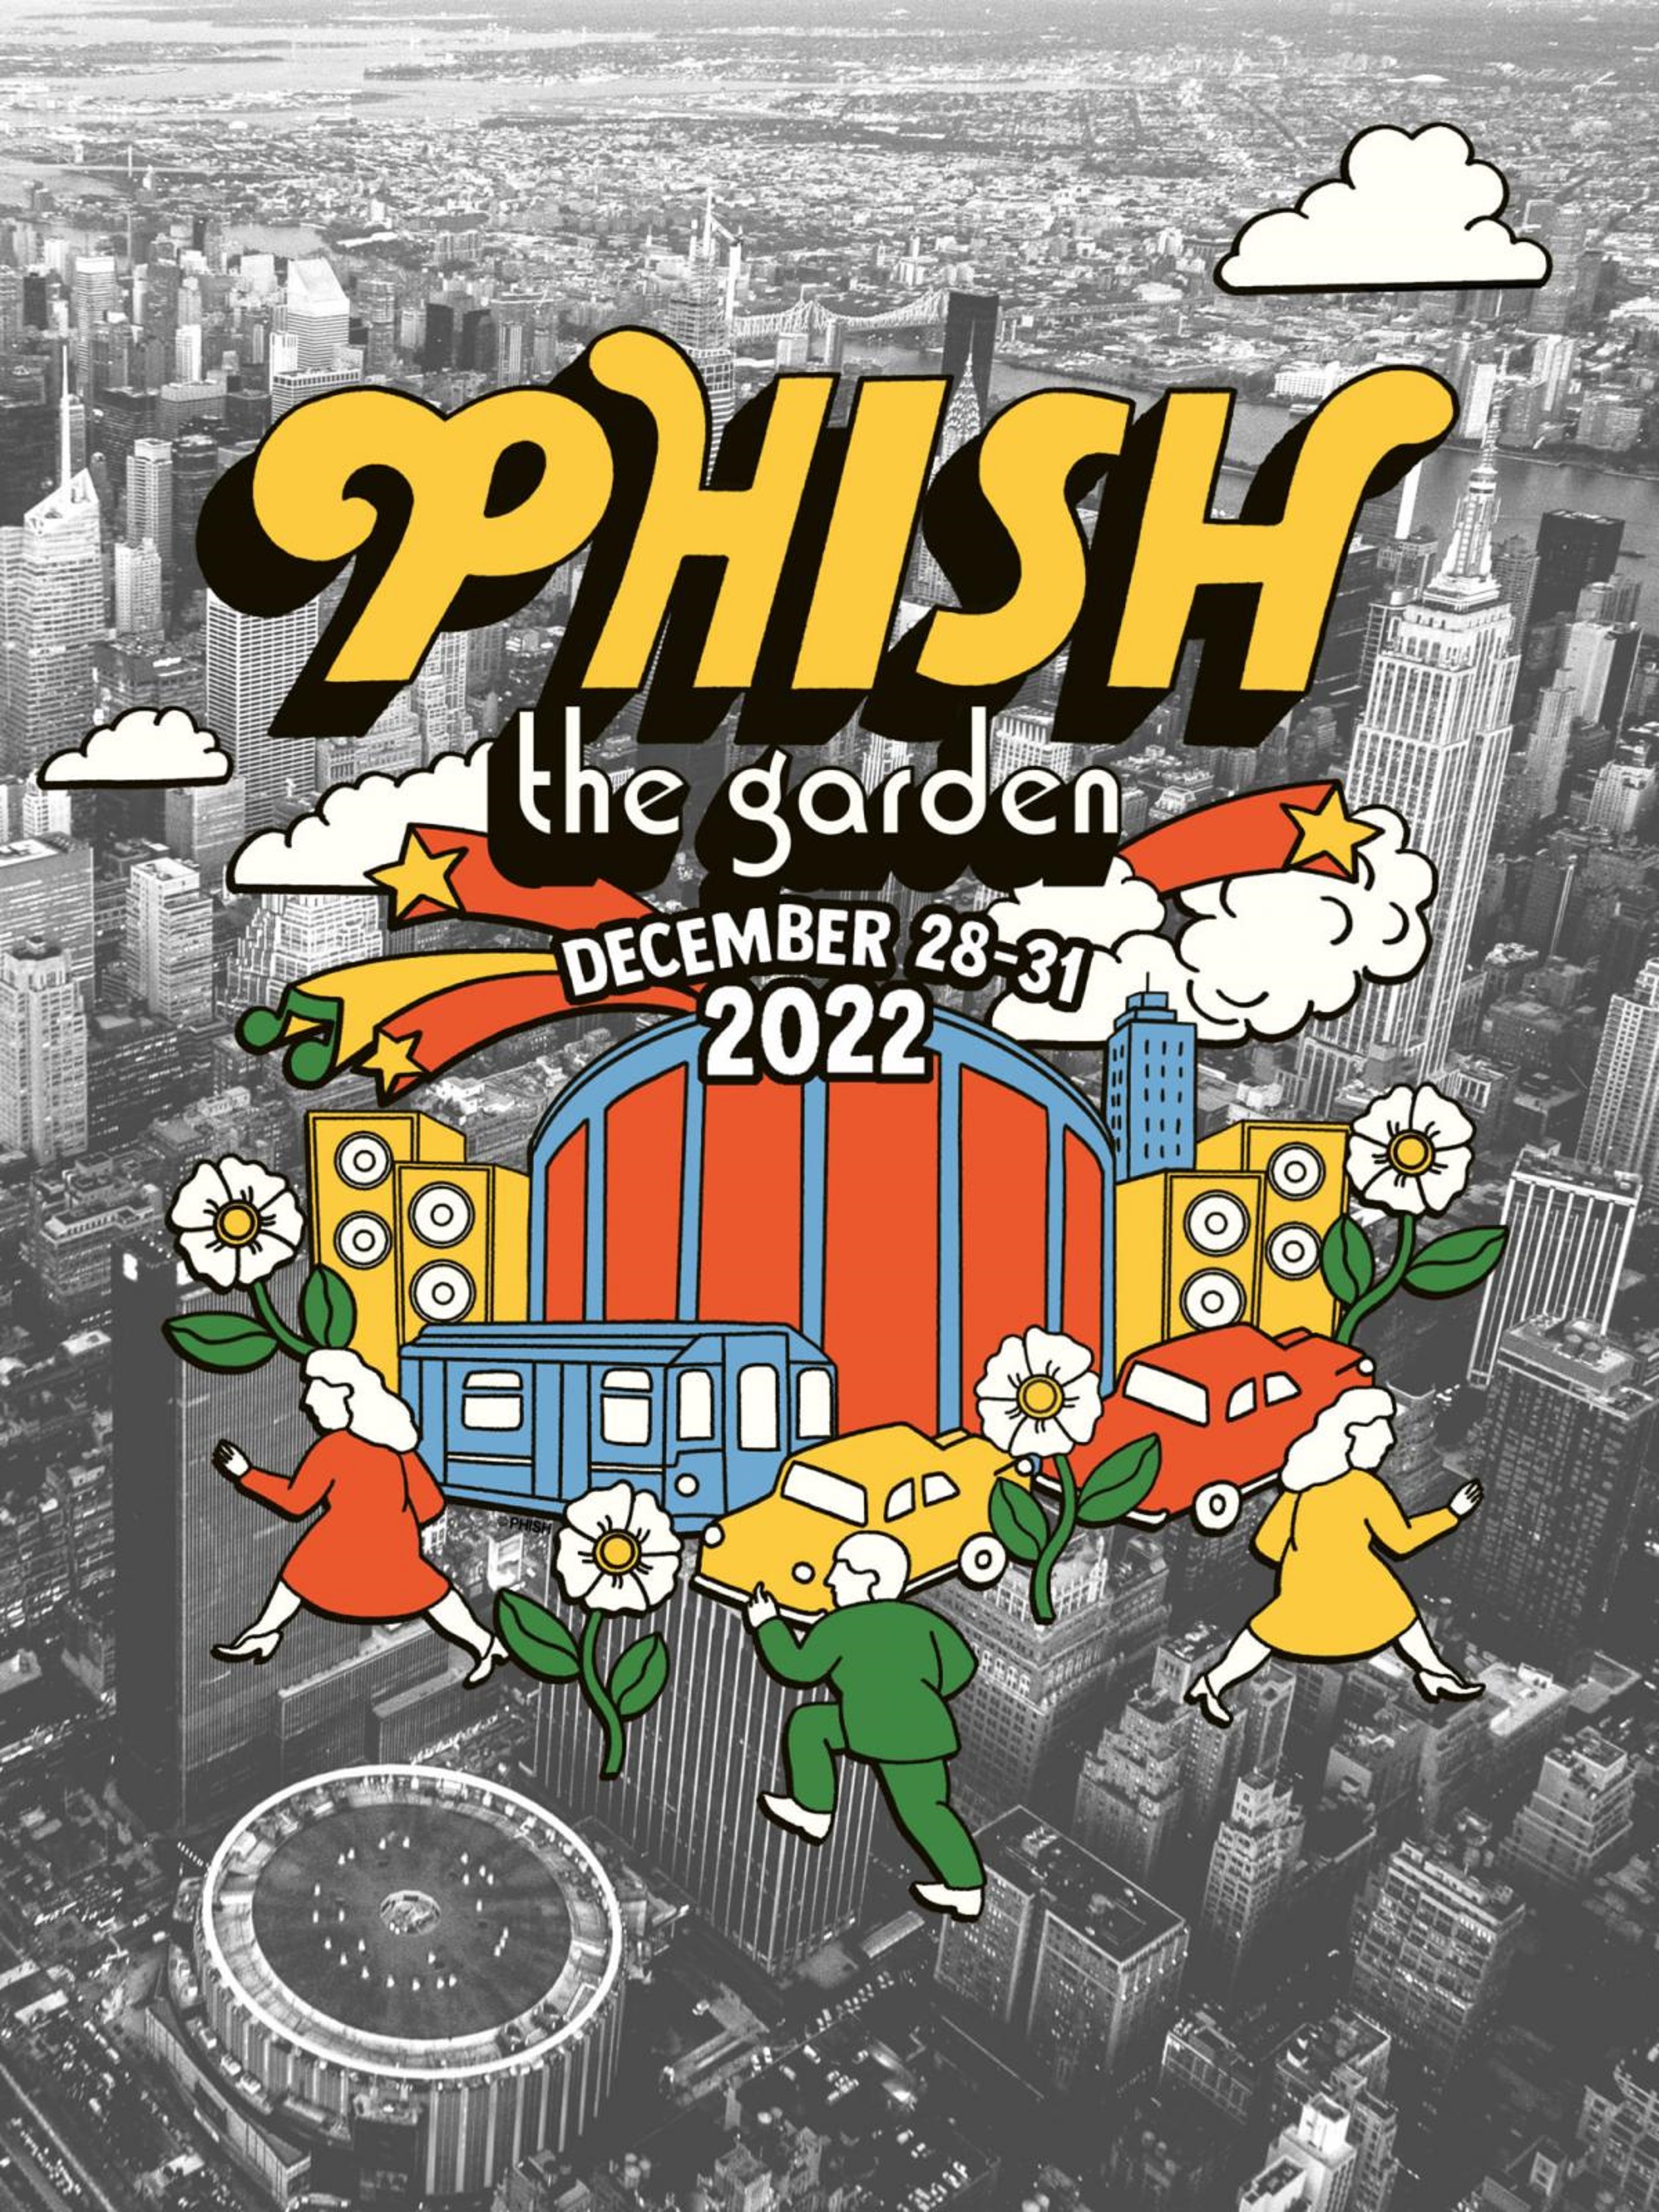 Phish Signed Posters & NYE Tix Auction Ends Tomorrow